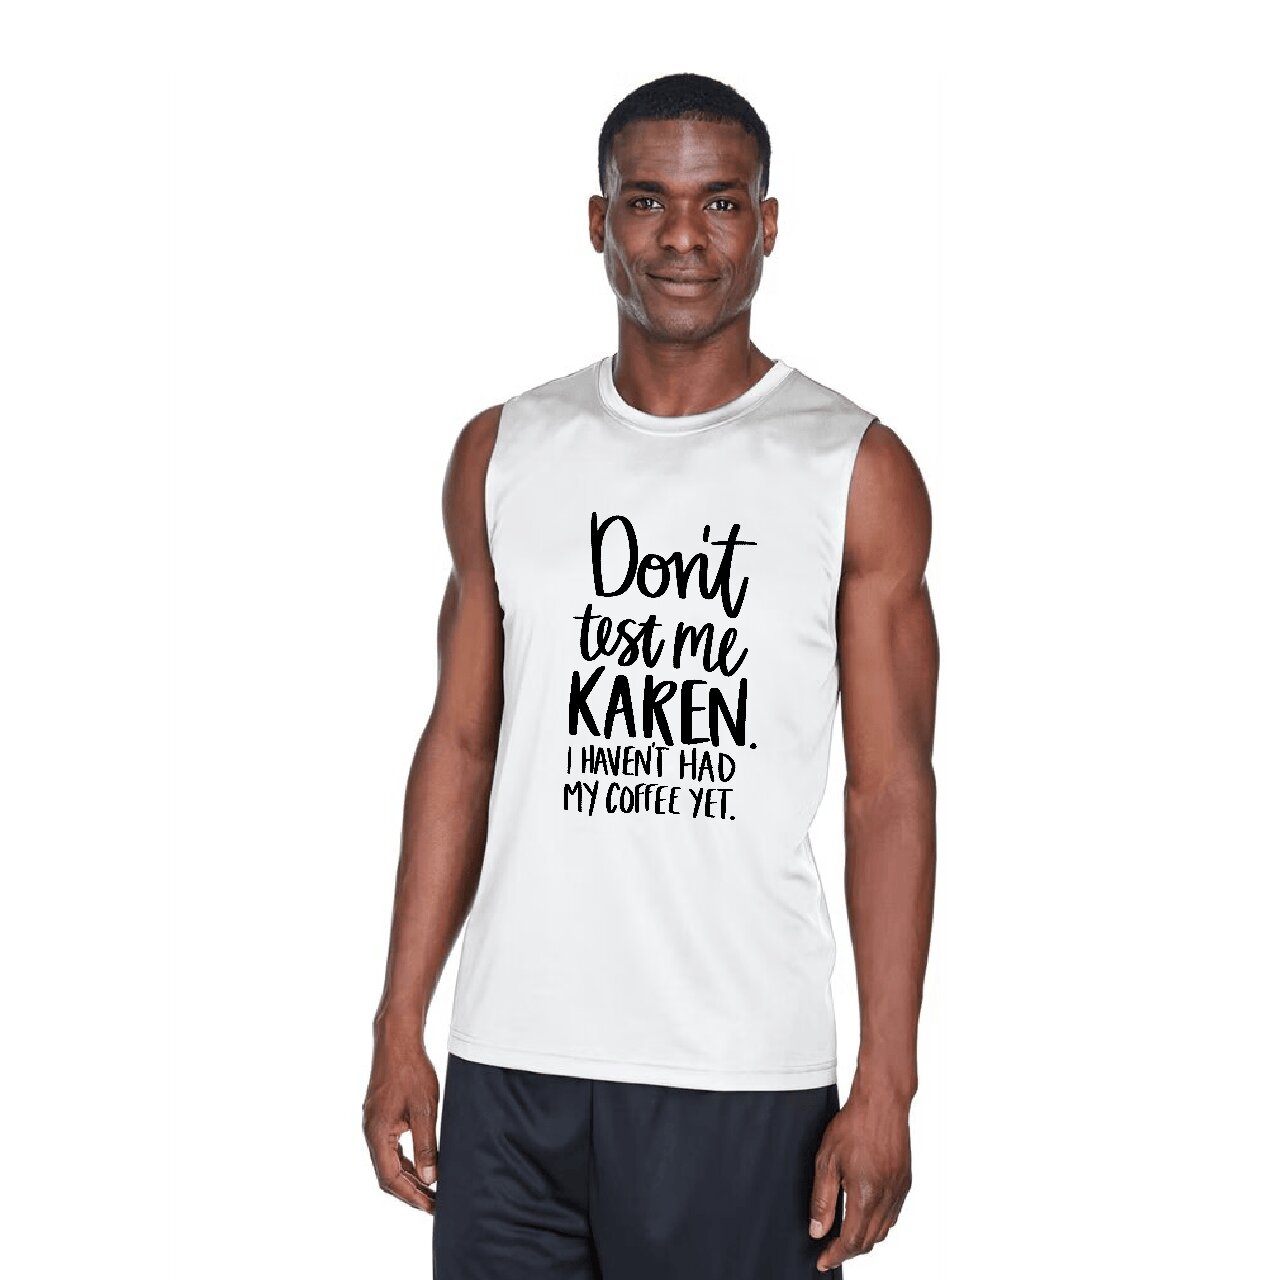 Don't Test me Karen. I Haven't Had My Coffee Yet.- Tank Top